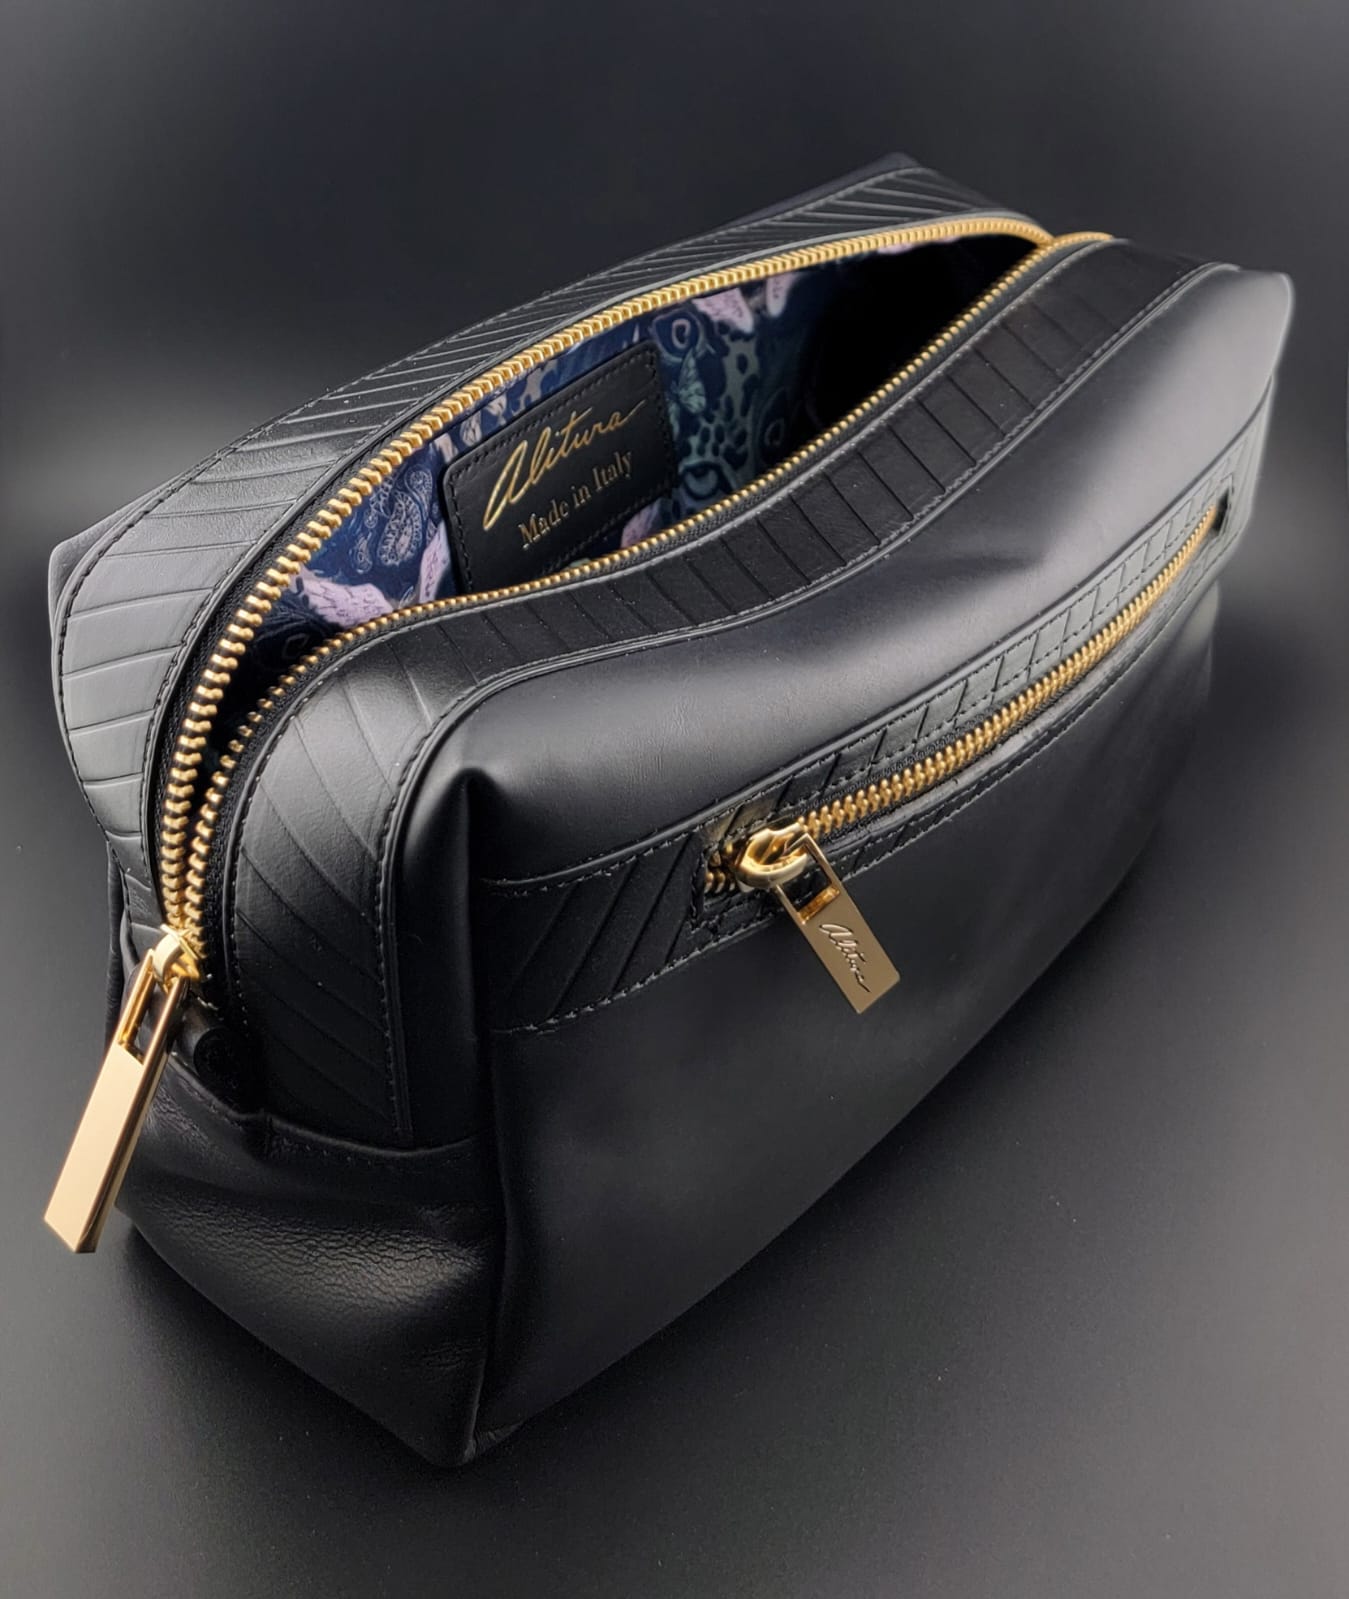 The Italian Leather Toiletry Pouch